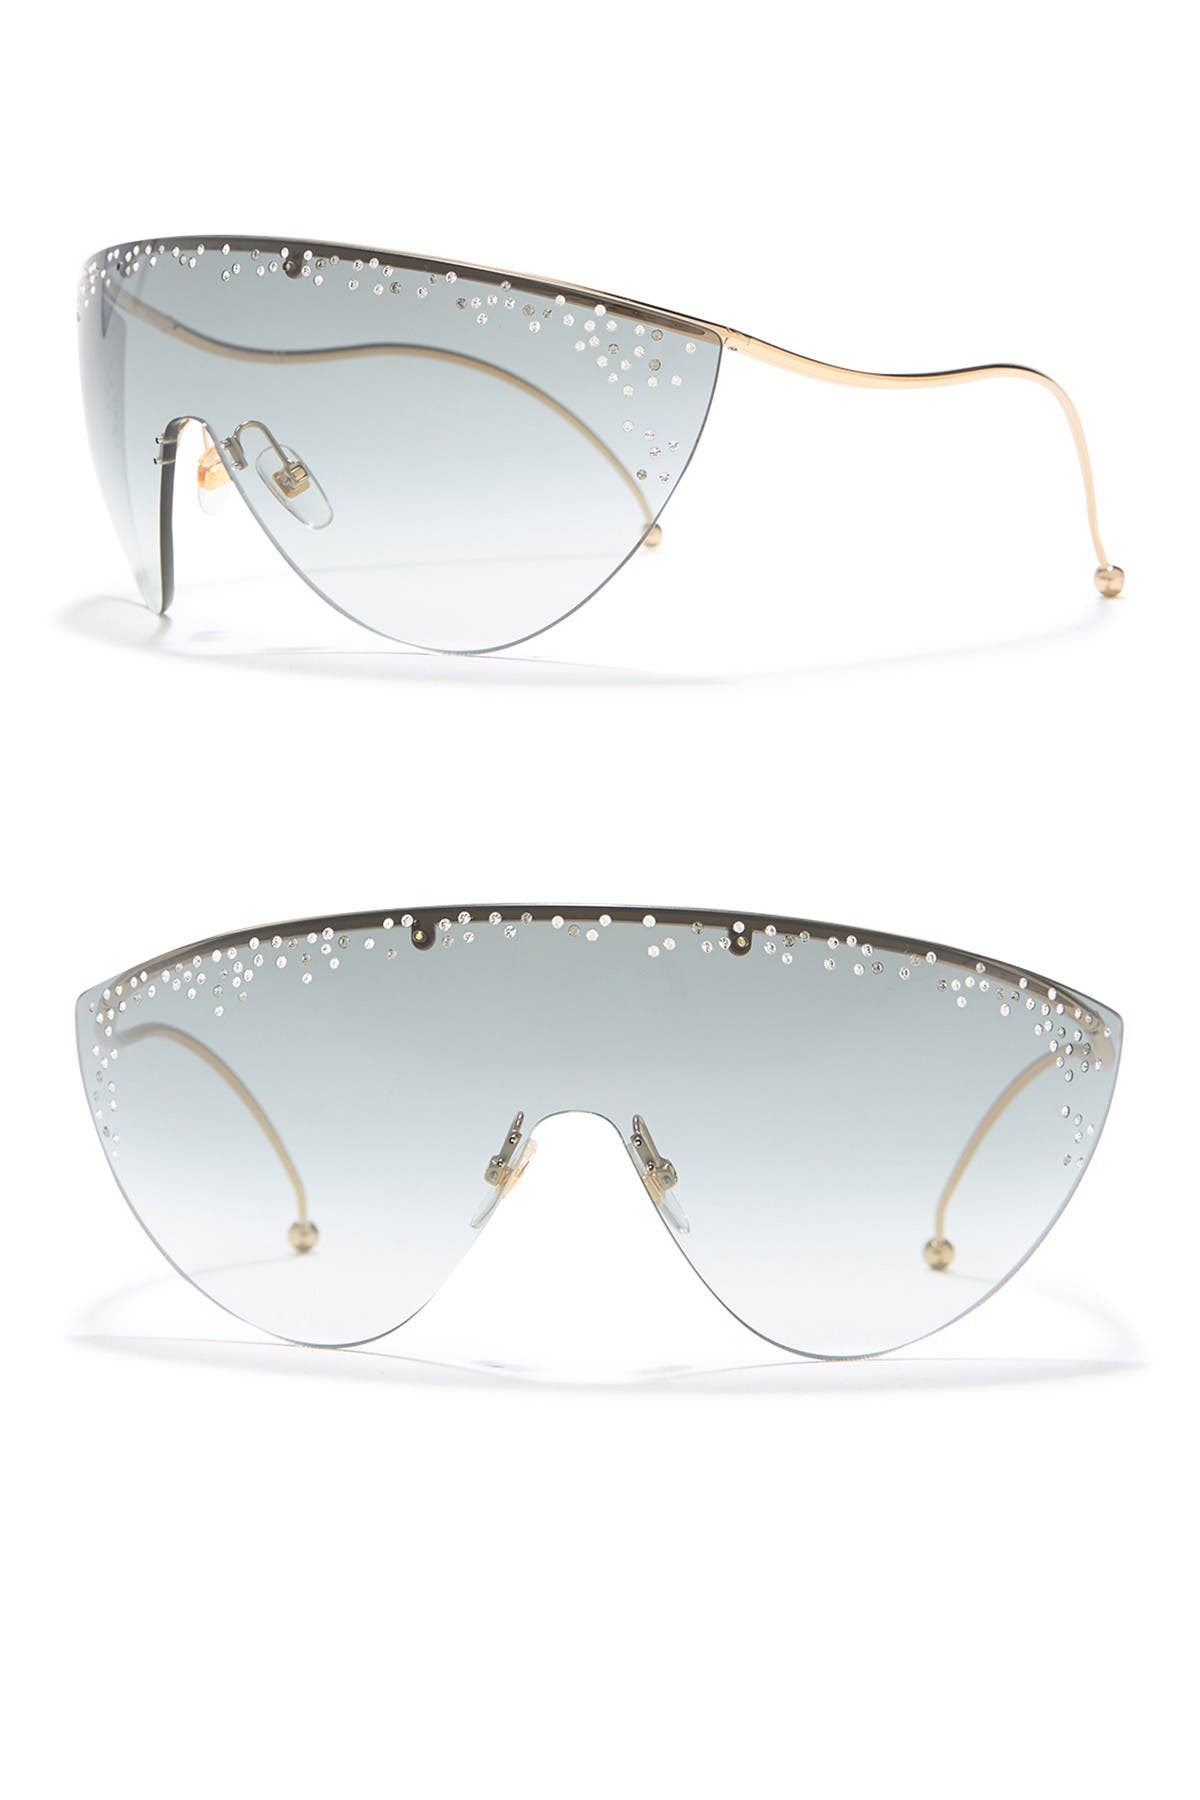 givenchy sunglasses nordstrom rack